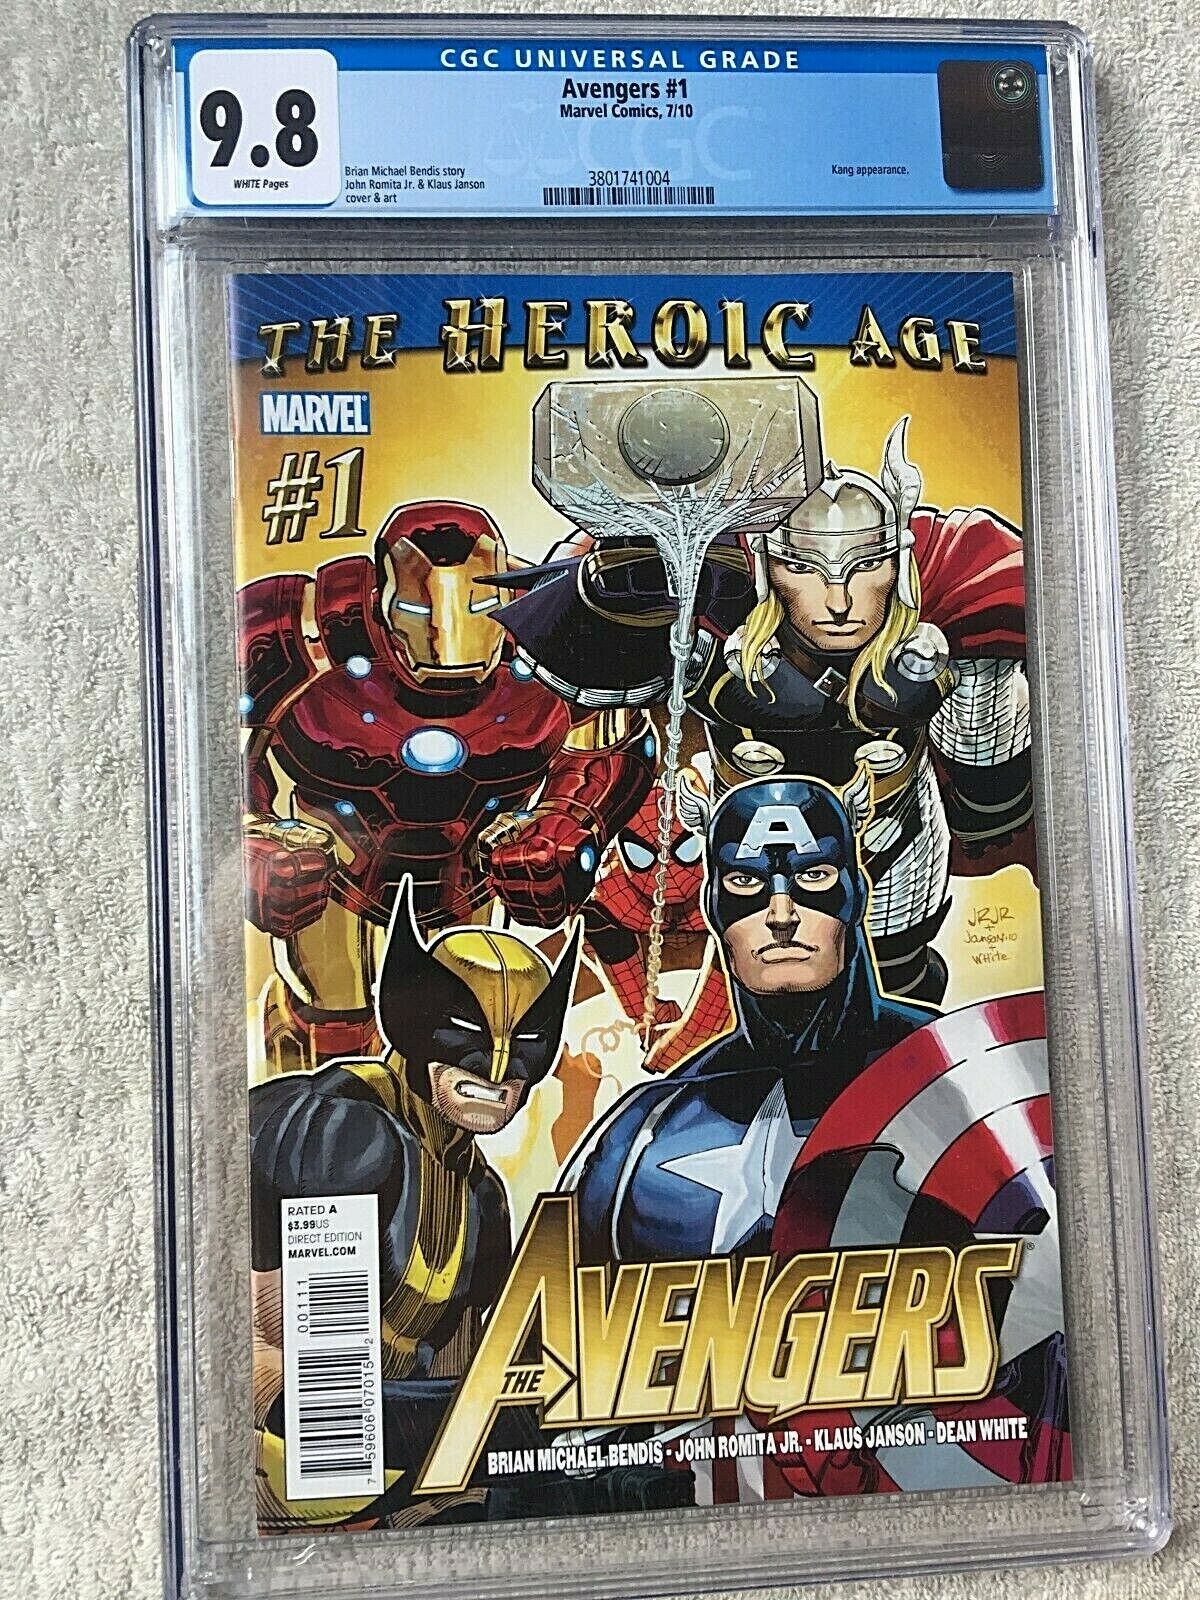 Avengers #1 The Heroic Age Marvel July 2010 cgc 9.8 Wh/Pgs PLUS N/M Free Reader